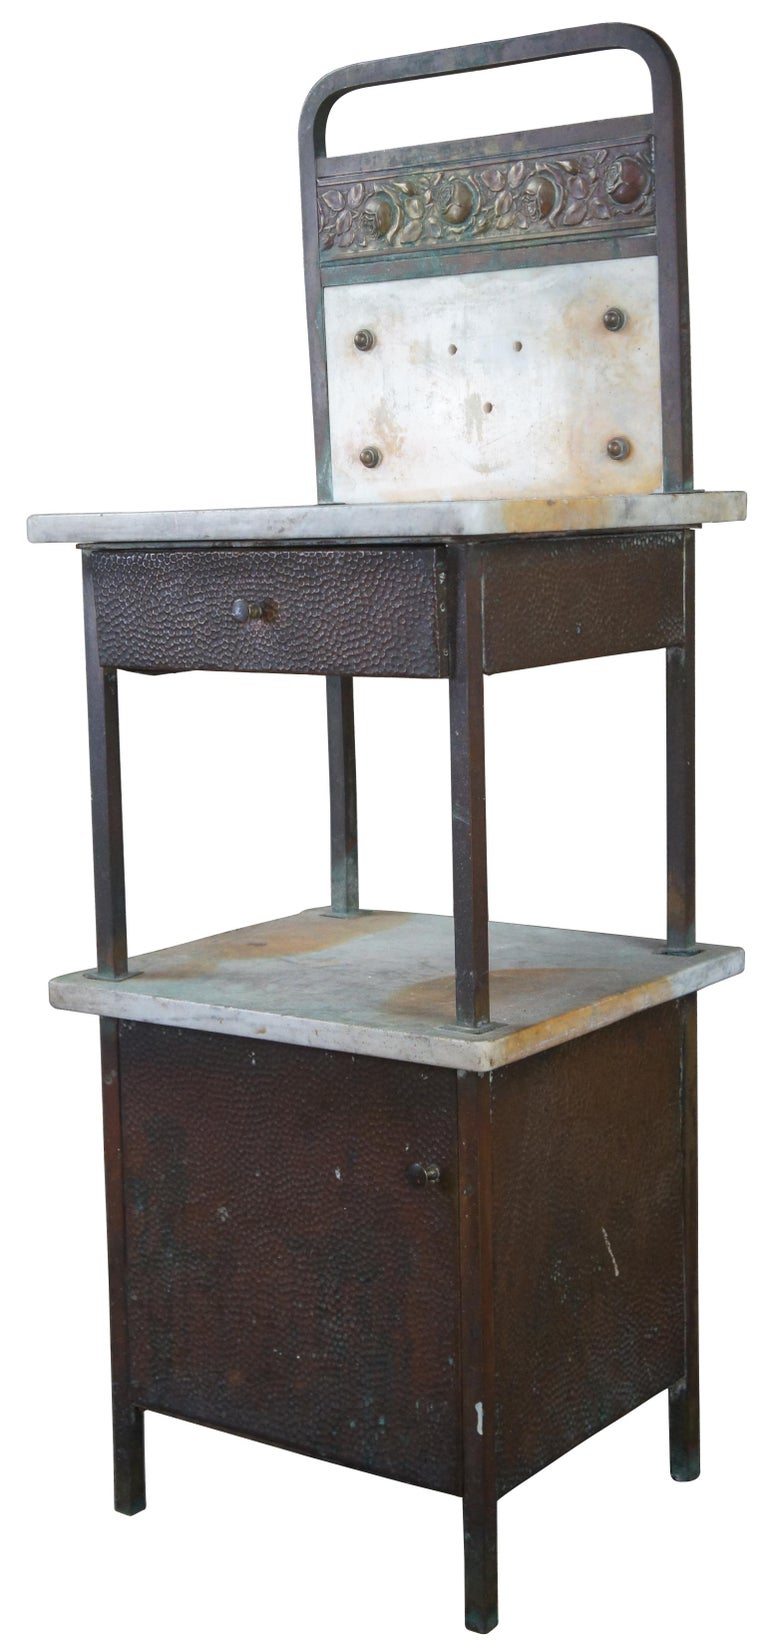 Antique two tier washstand or medical cabinet. Made of iron and marble featuring an upper drawer and lower cabinet. Measure: 46